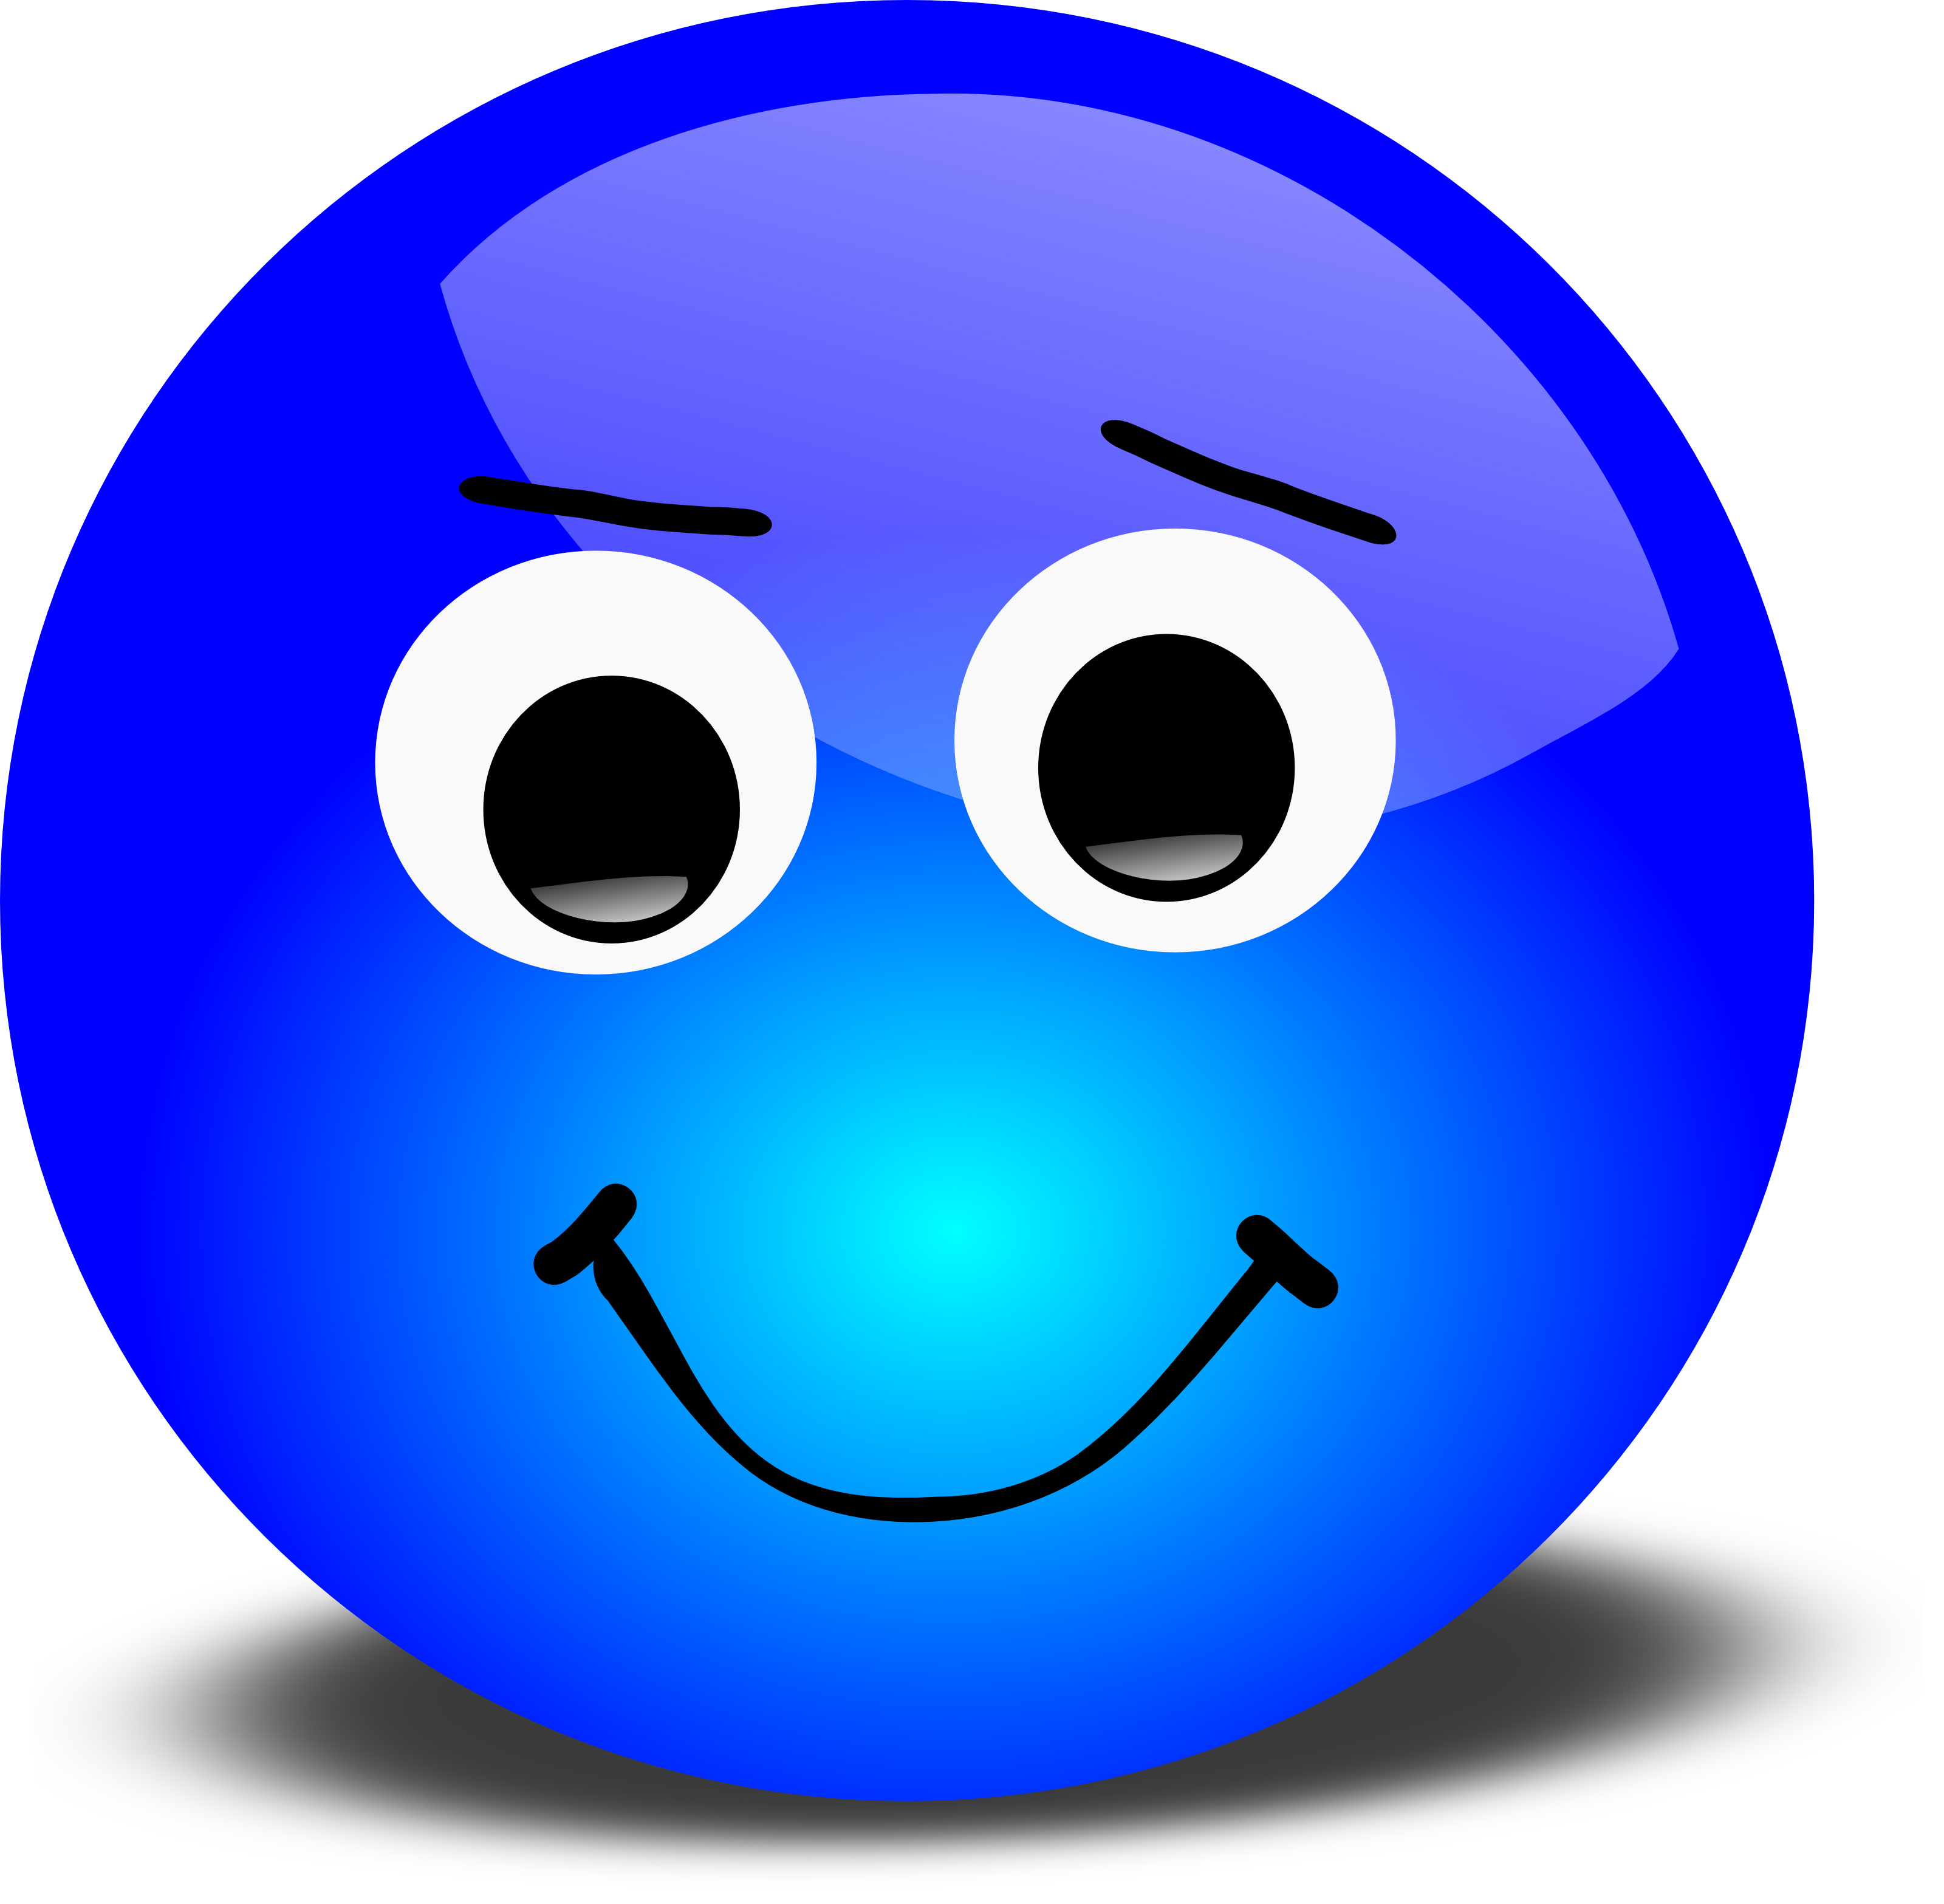 Free Clip Art Smiley Faces Animated - ClipArt Best